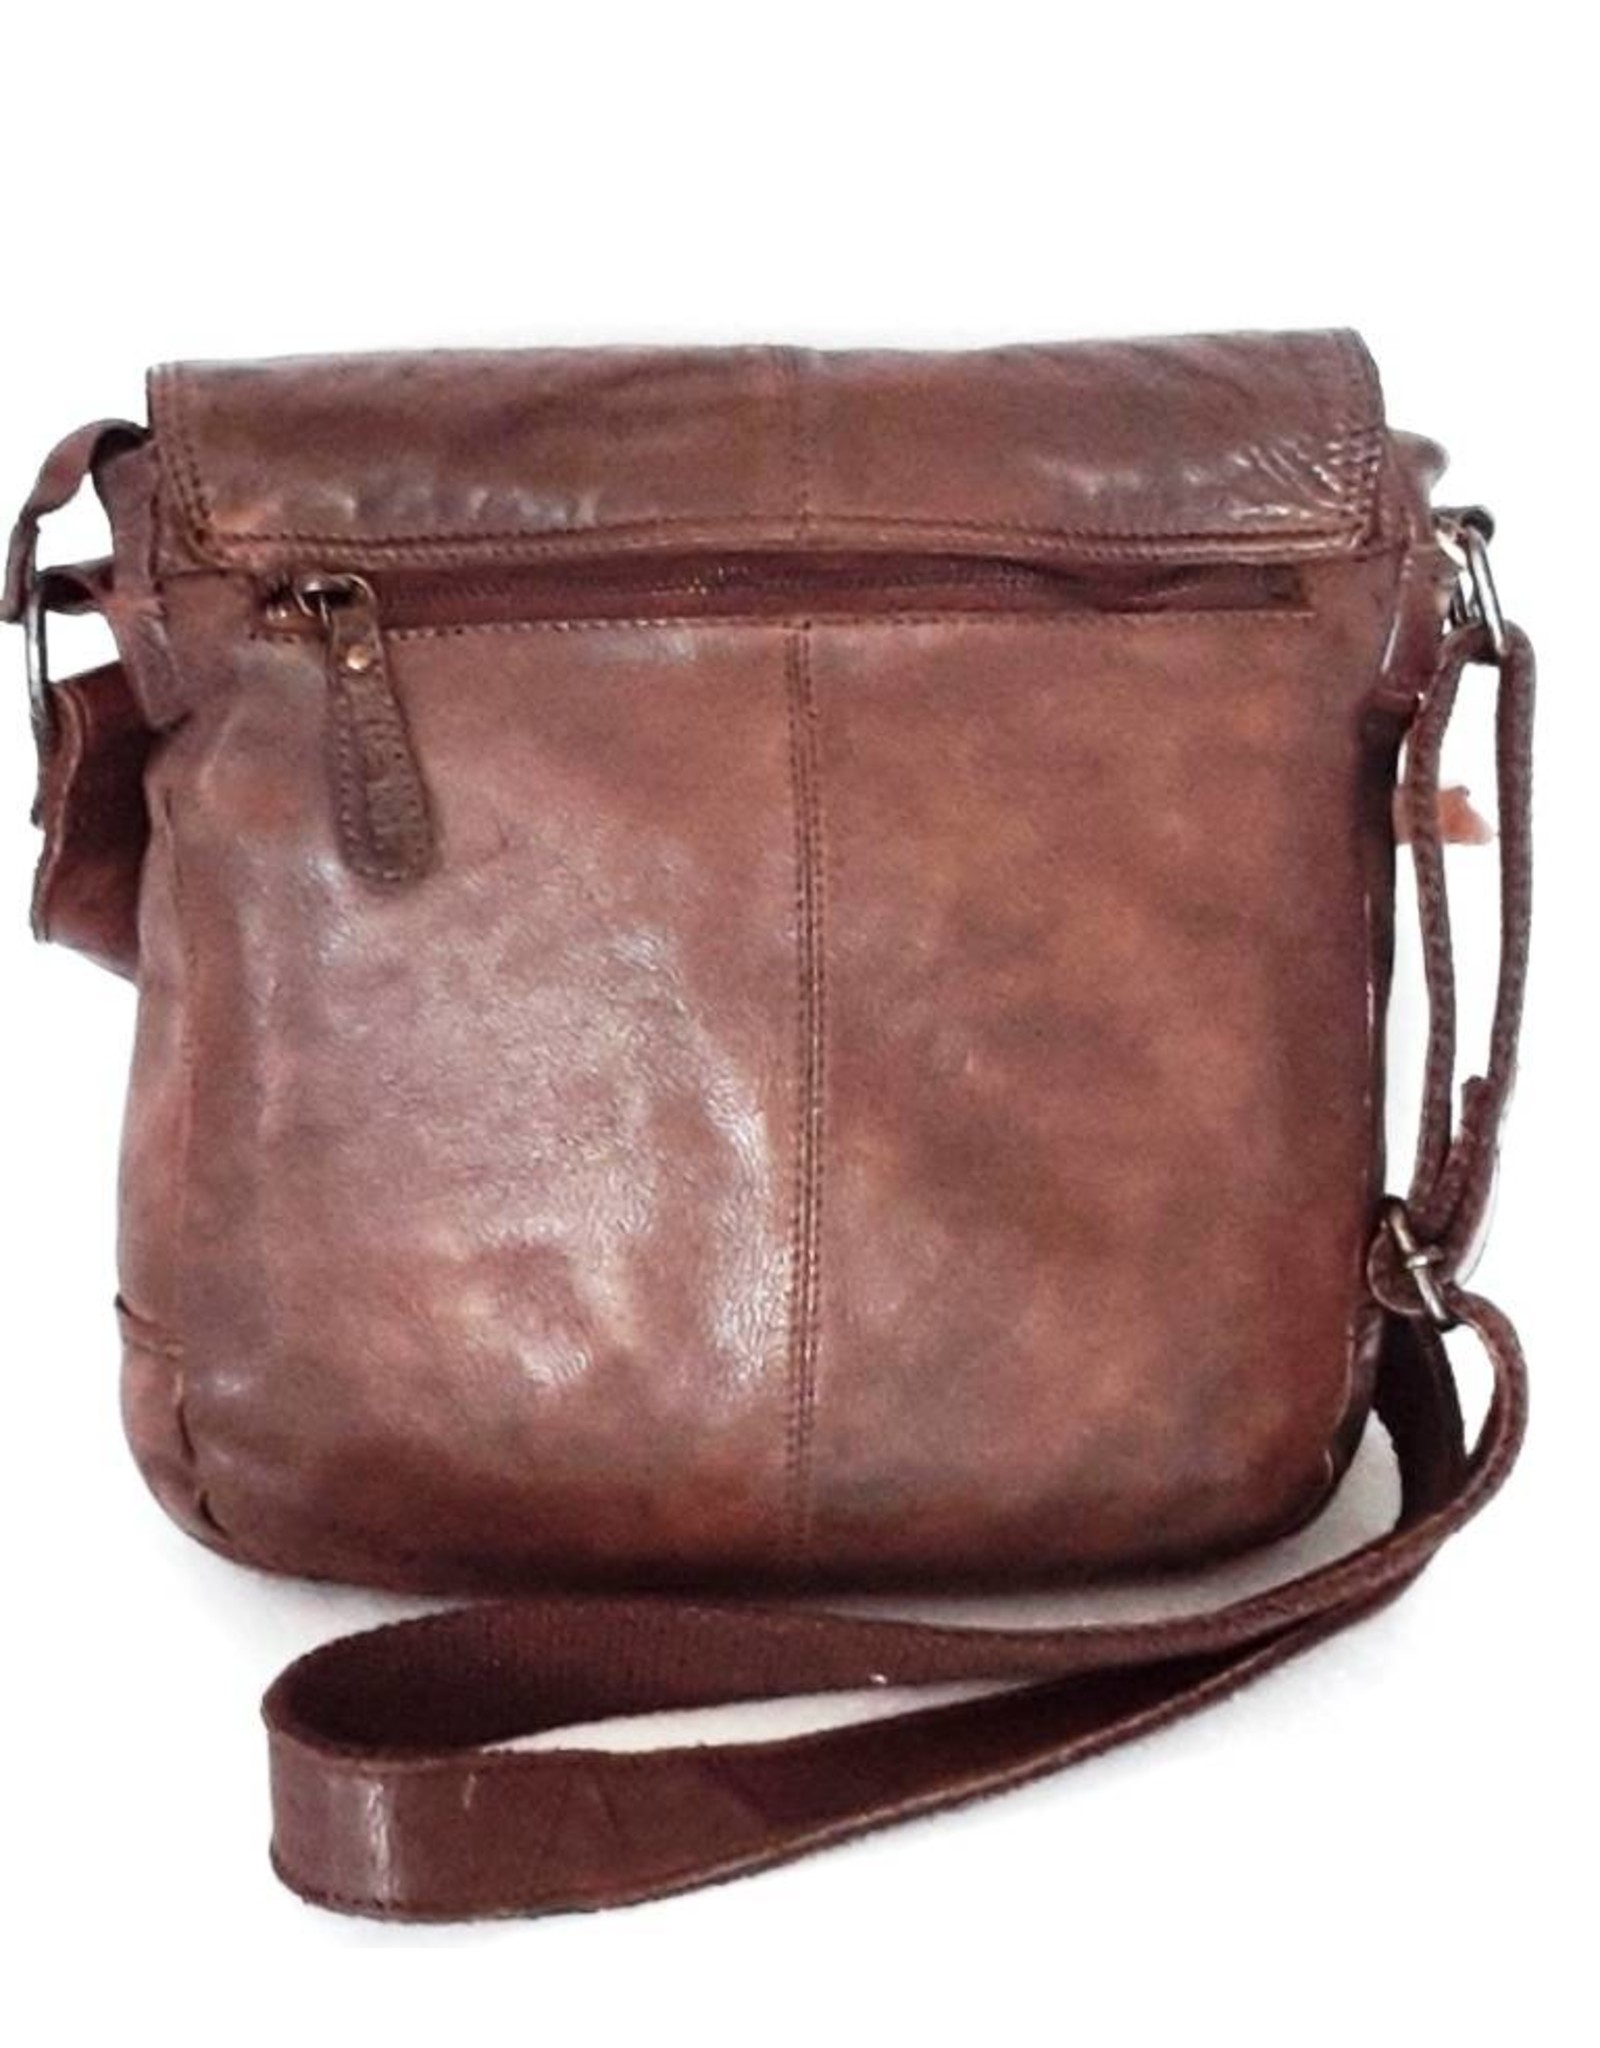 HillBurry Leather bags - Hillburry leather shoulder bag brown